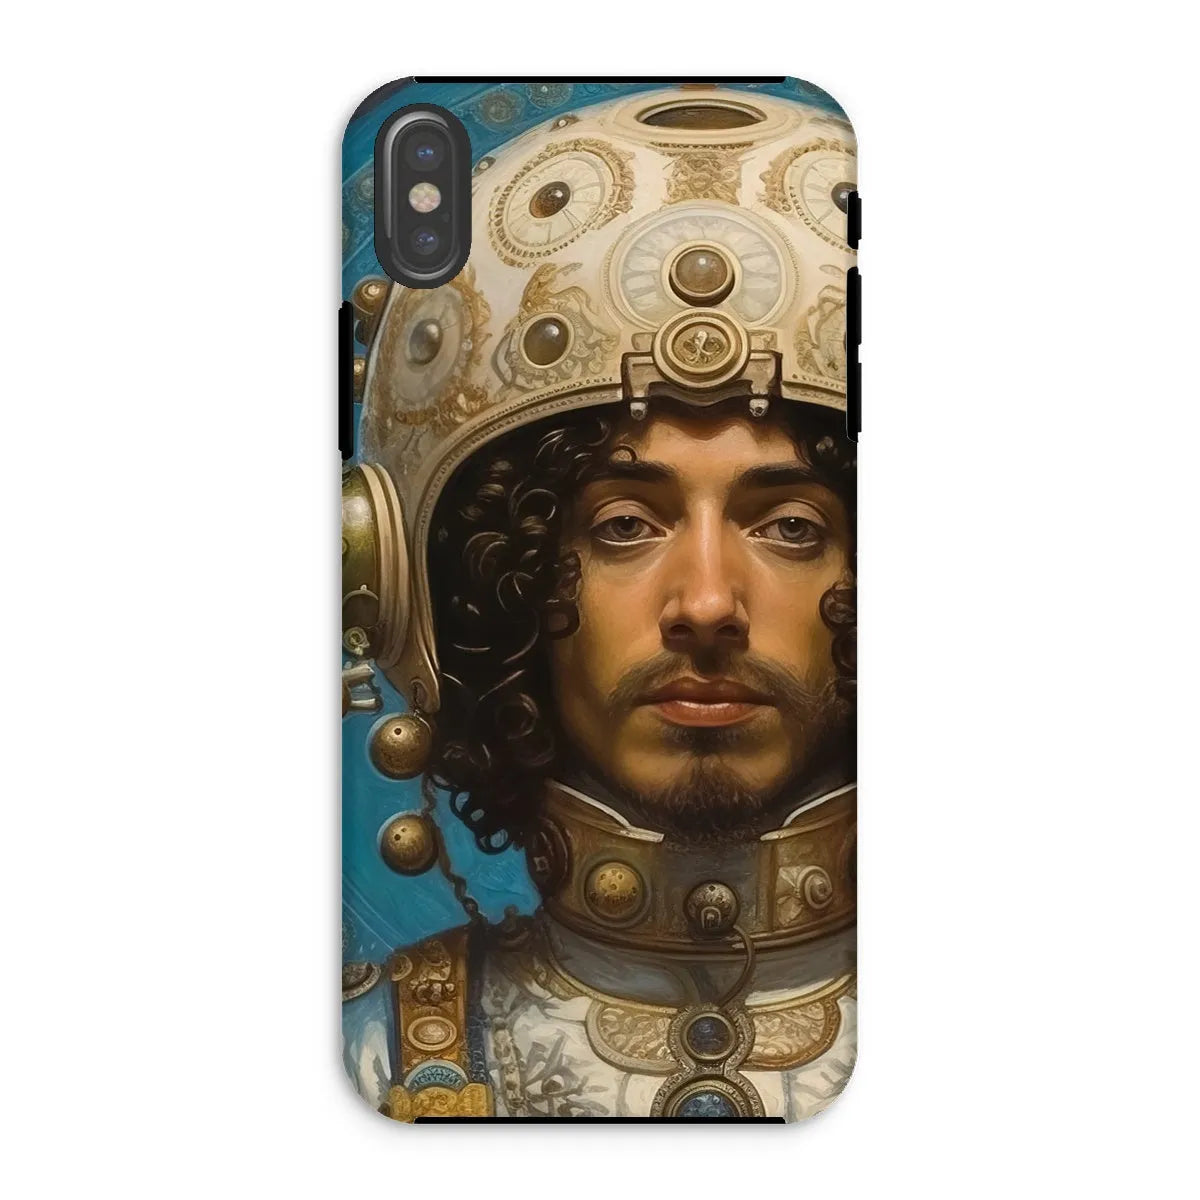 Mehdi The Gay Astronaut - Lgbtq Art Phone Case - Iphone Xs / Matte - Mobile Phone Cases - Aesthetic Art